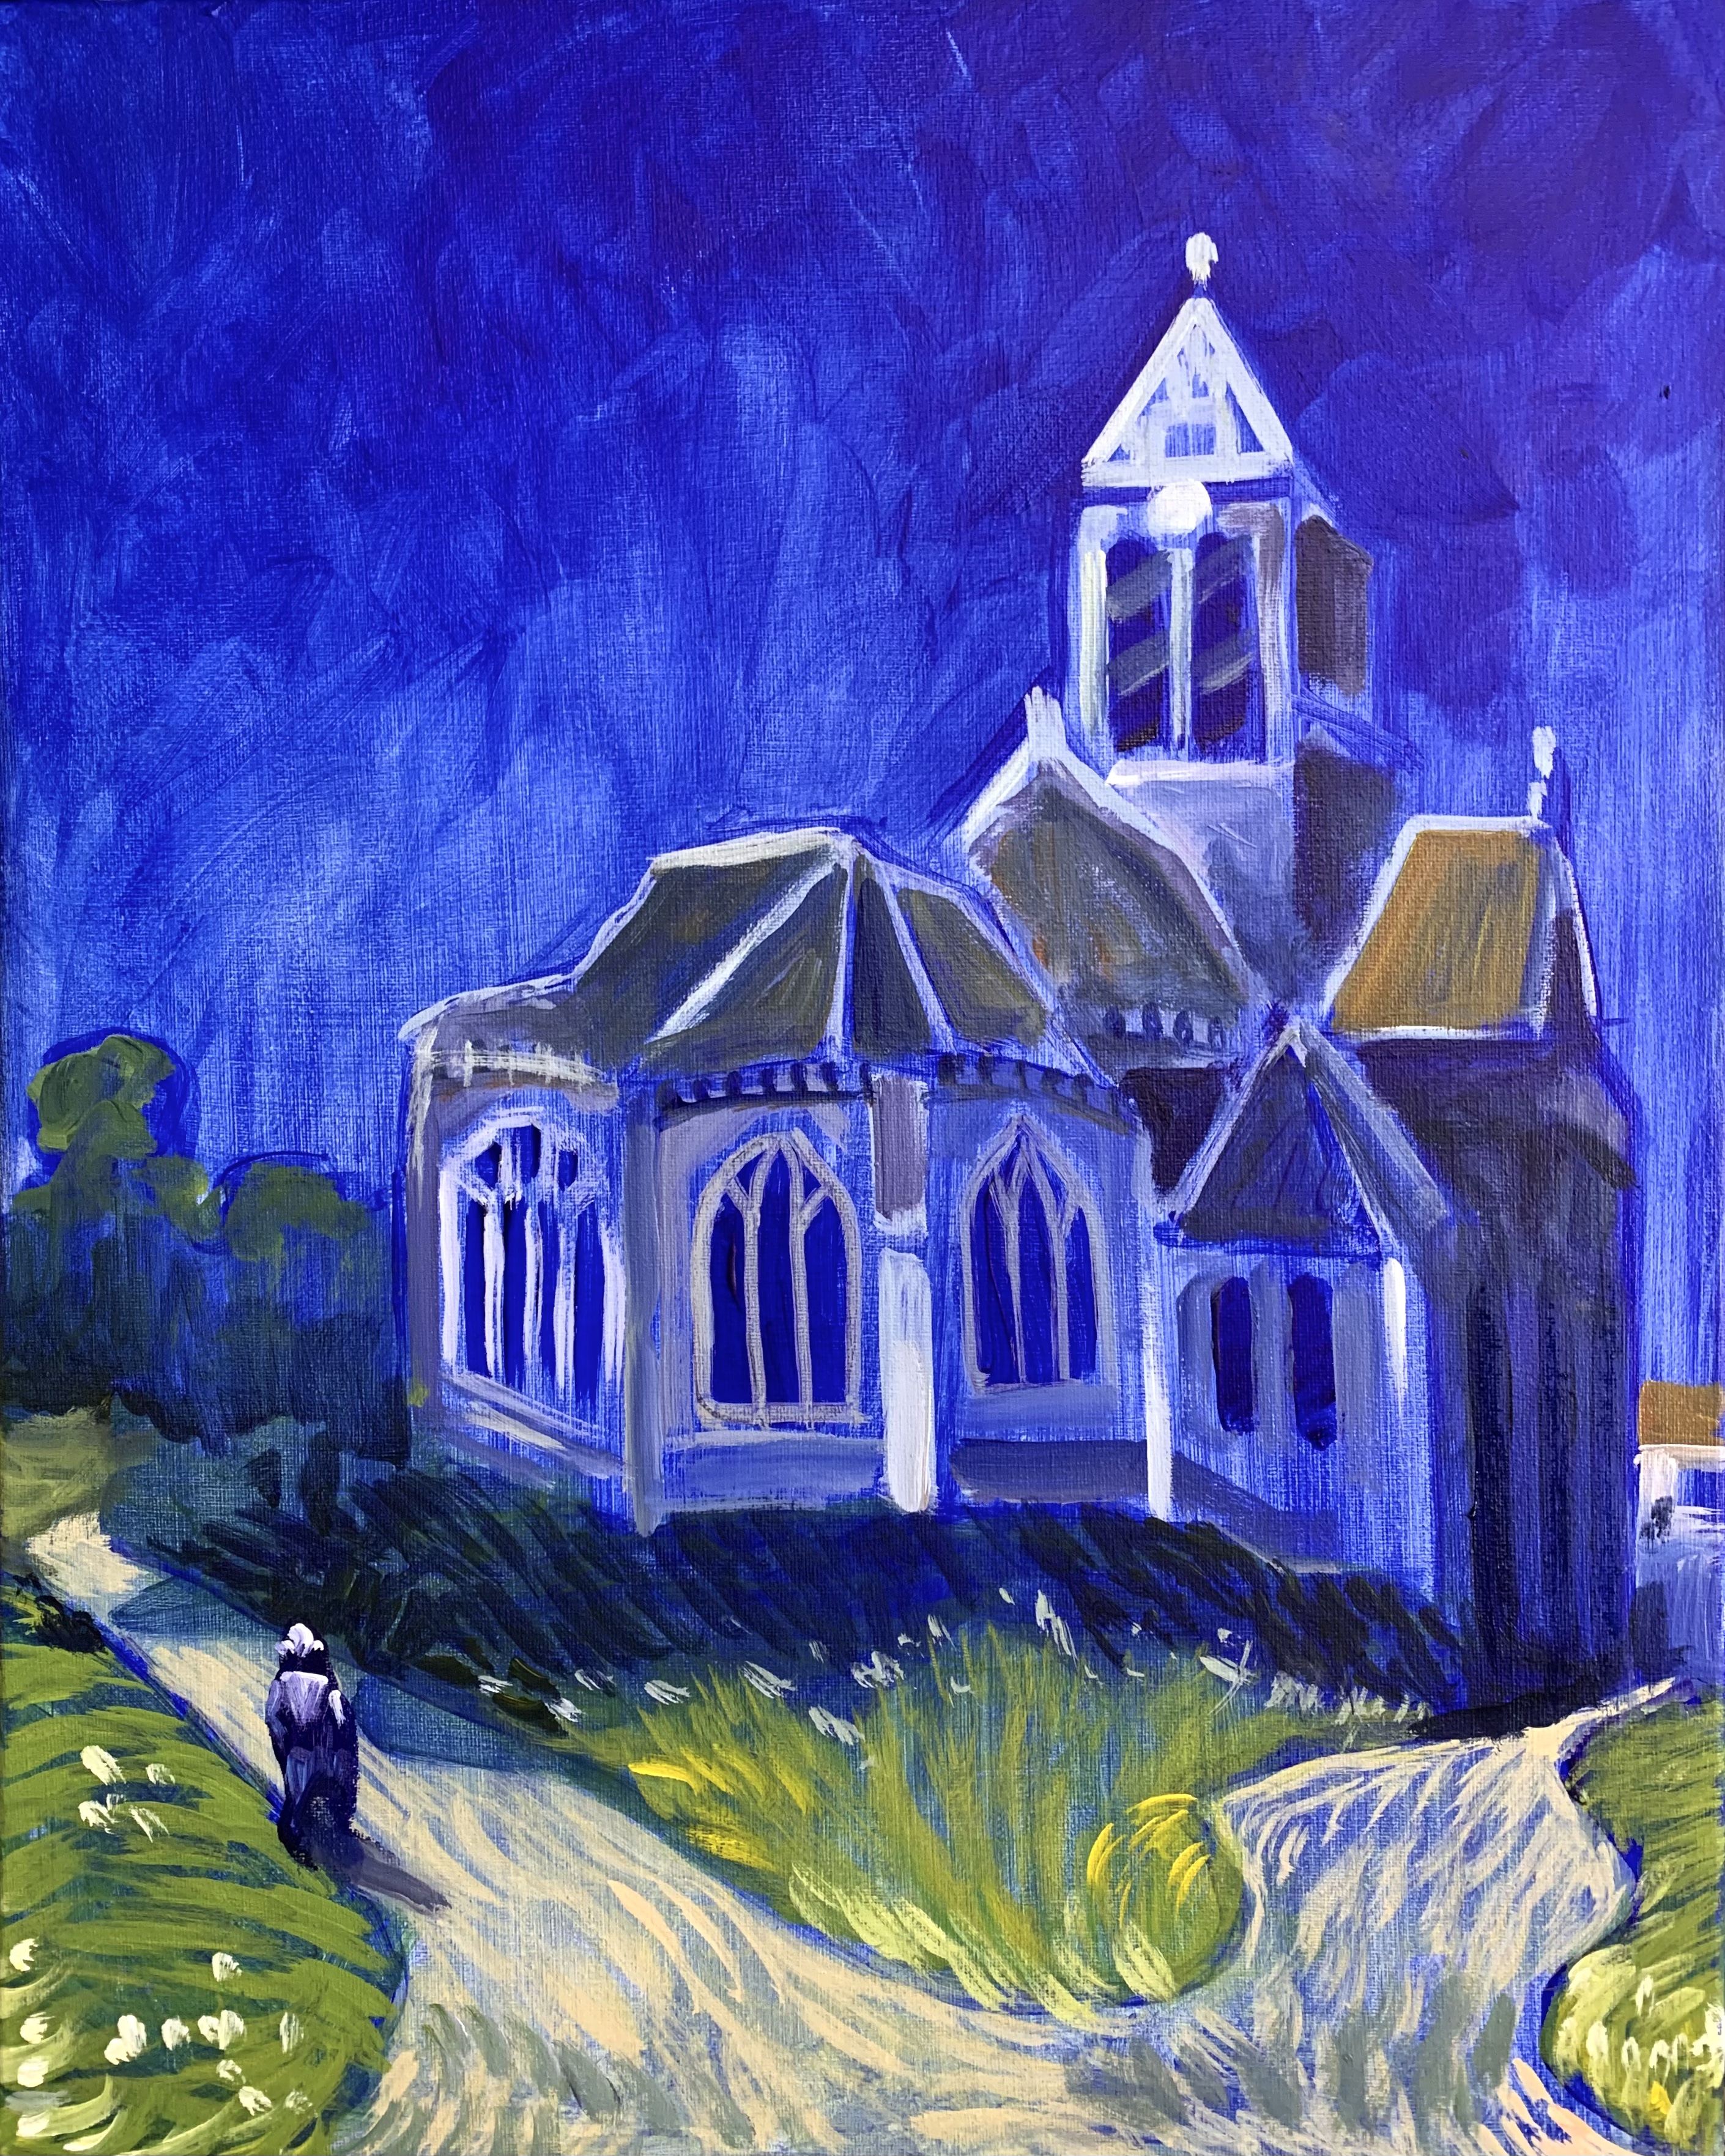 A Vincent van Gogh  The Church at Auvers experience project by Yaymaker